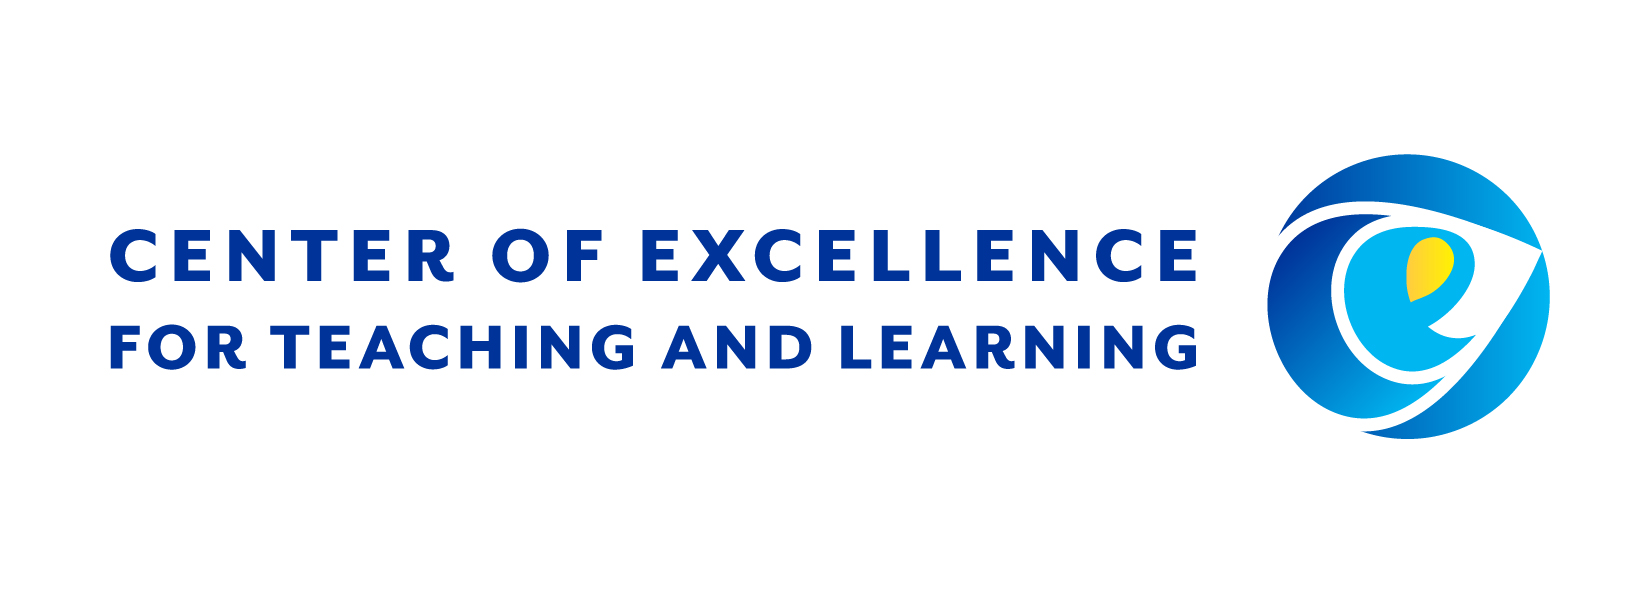 Center of Excellence for Teaching and Learning logo